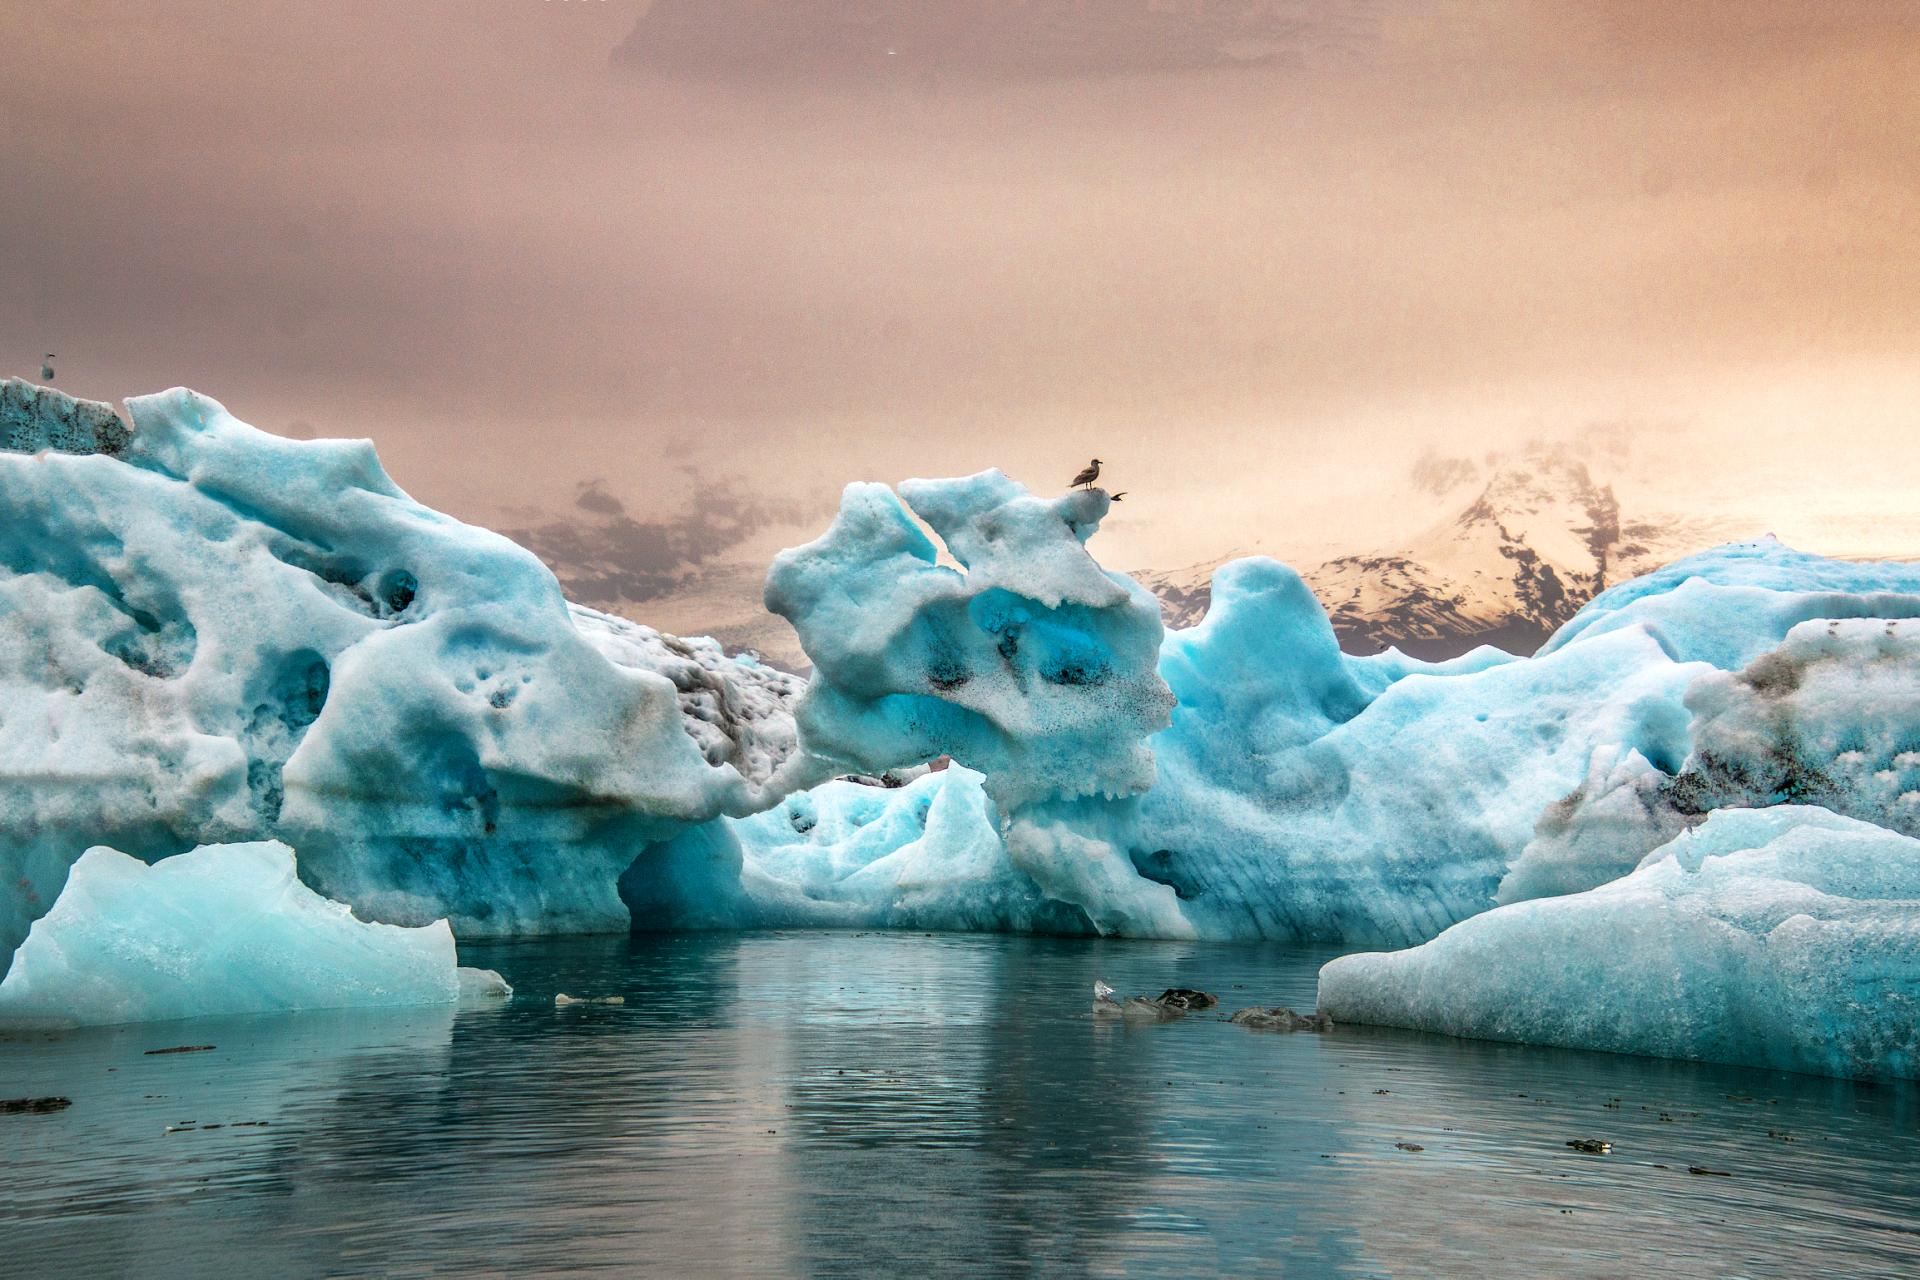 Beautiful Image of the icebergs in the sunset at Jökulsá glacier lagoon.